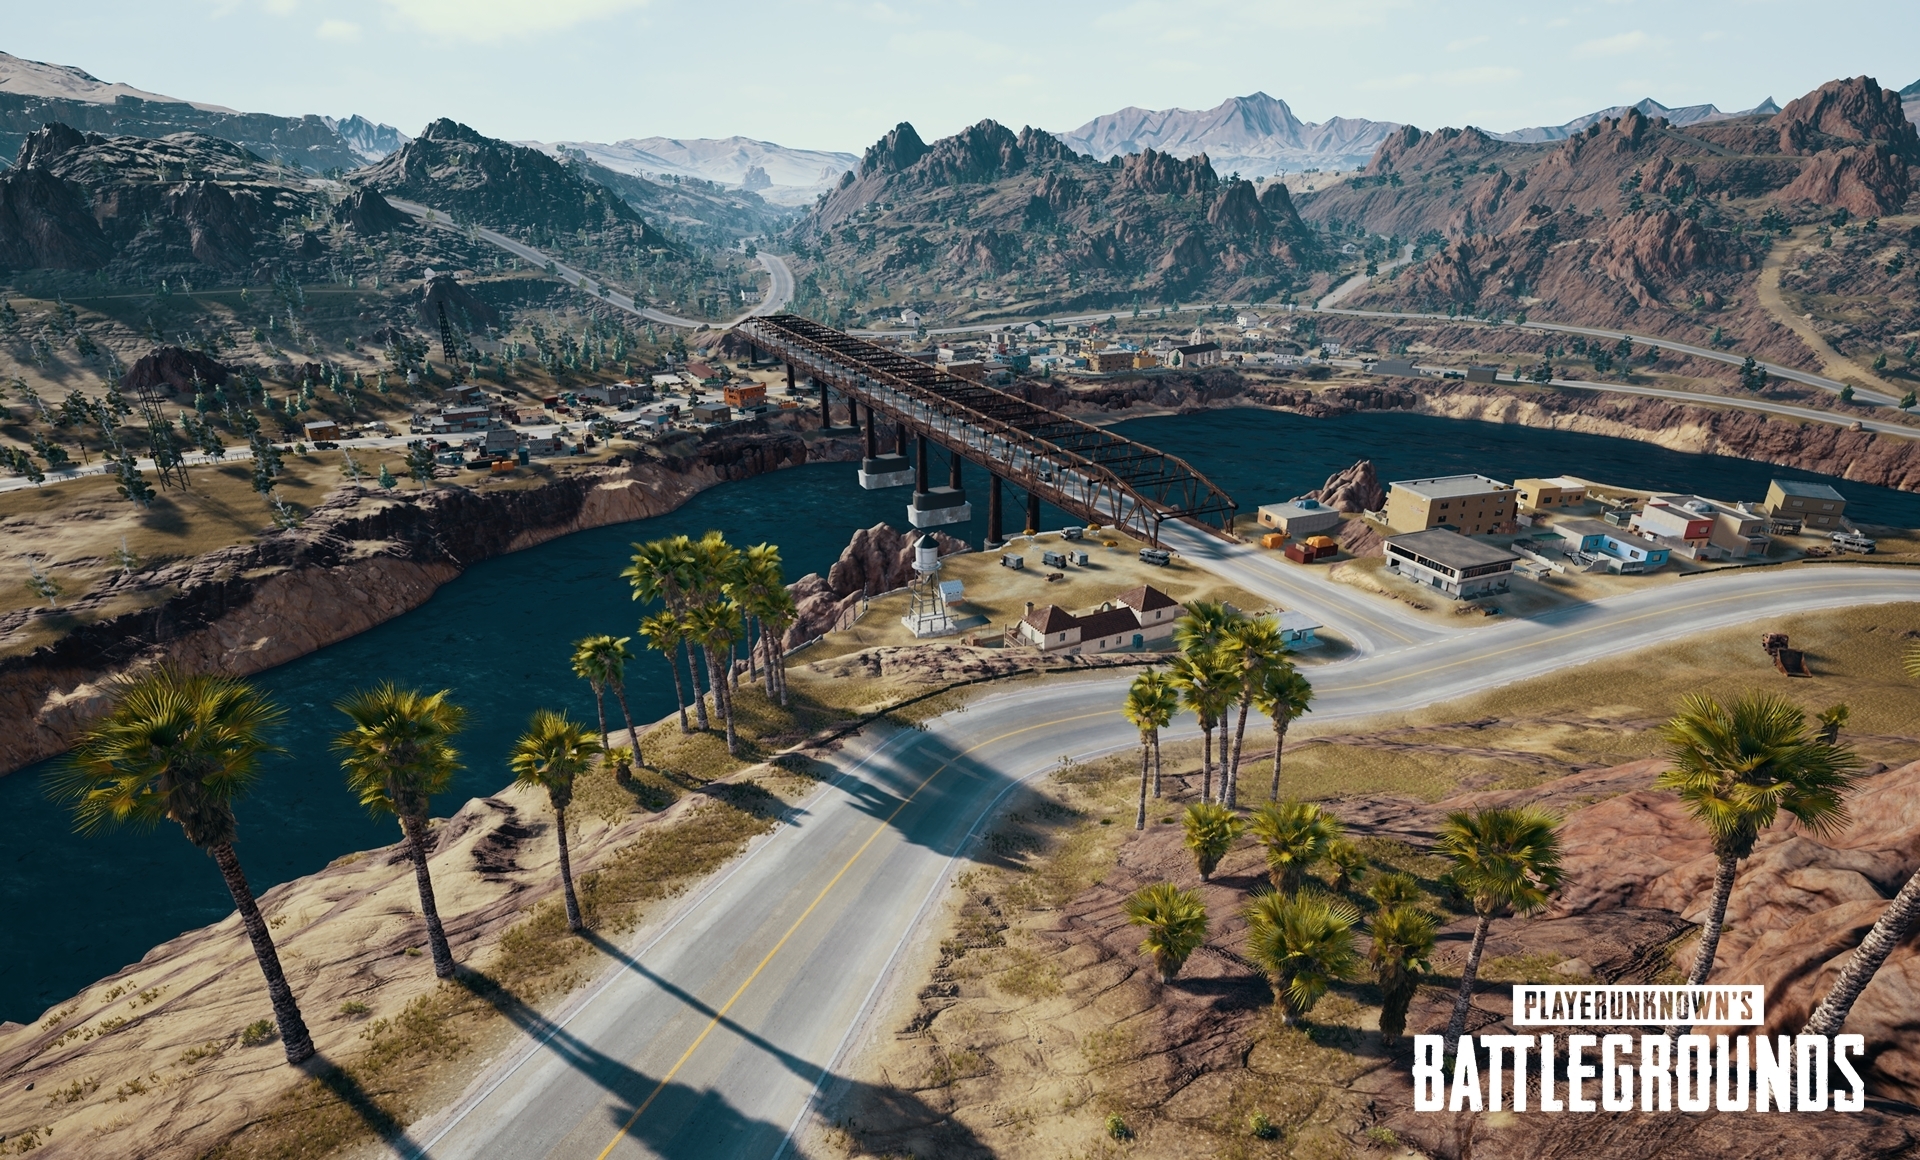 PLAYERUNKNOWN'S BATTLEGROUNDS - 1.0 Test Build Patch Notes